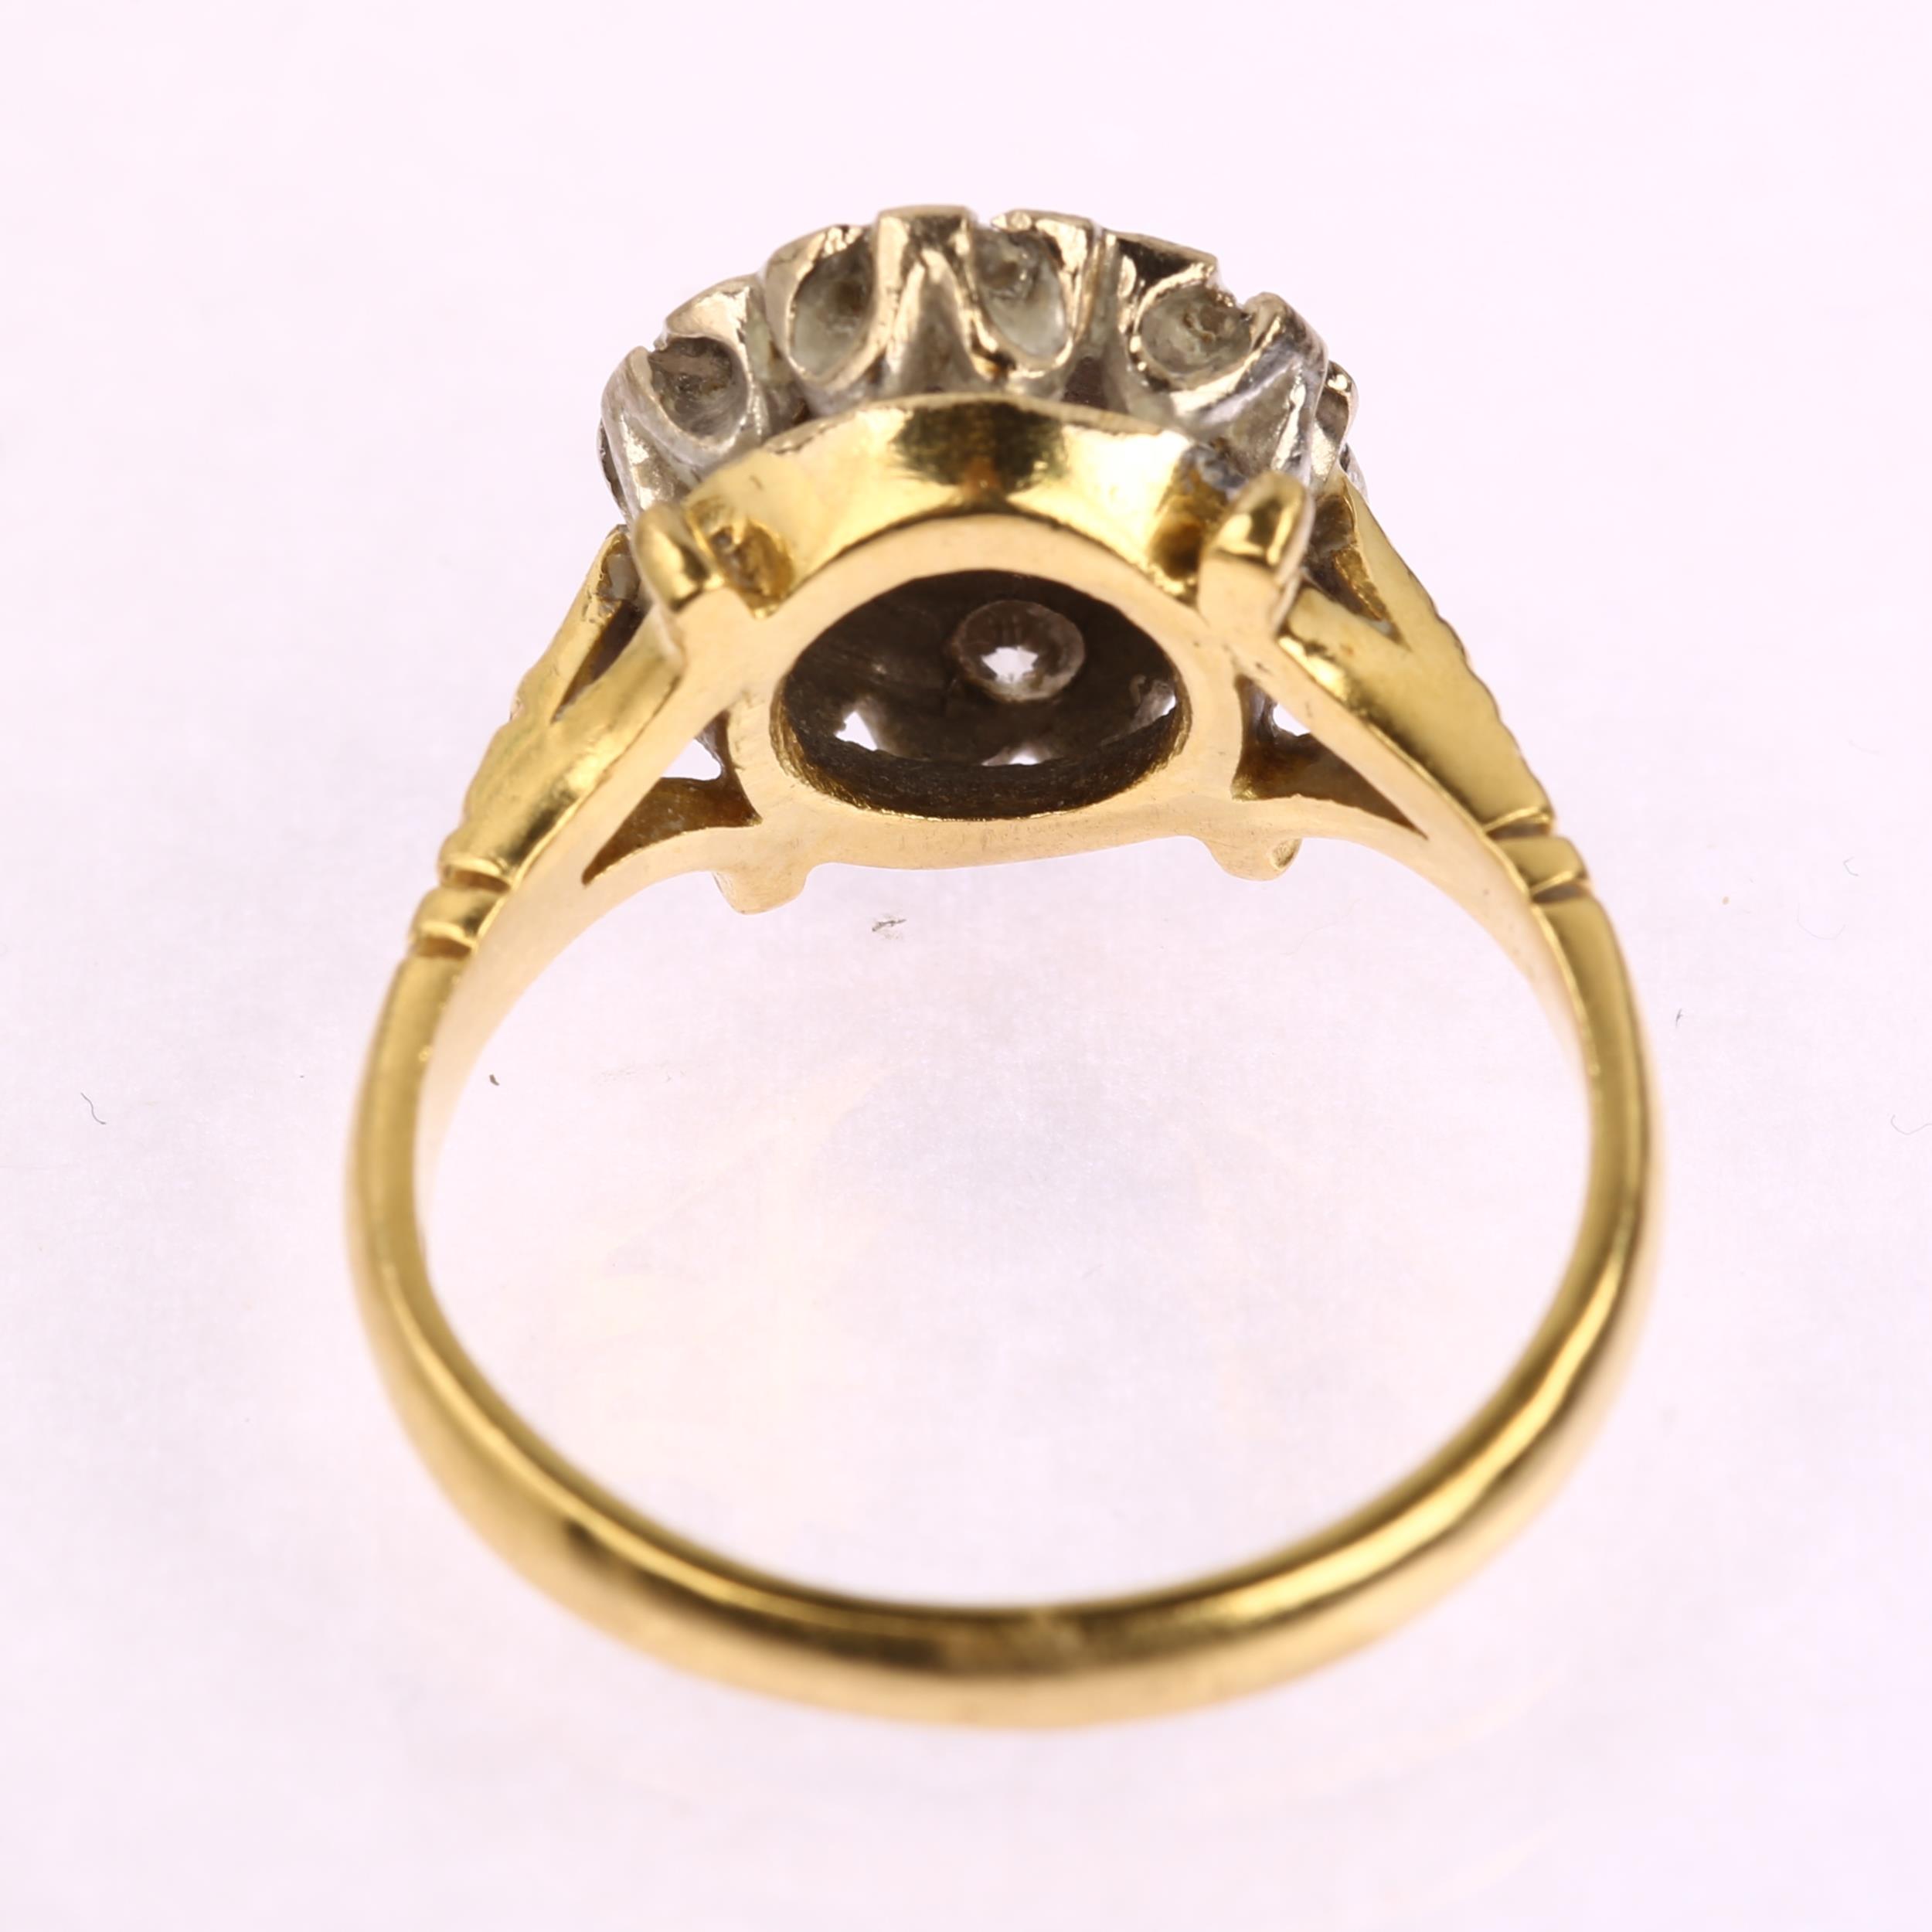 A late 20th century 18ct gold diamond flowerhead cluster ring, set with modern round brilliant-cut - Image 3 of 4